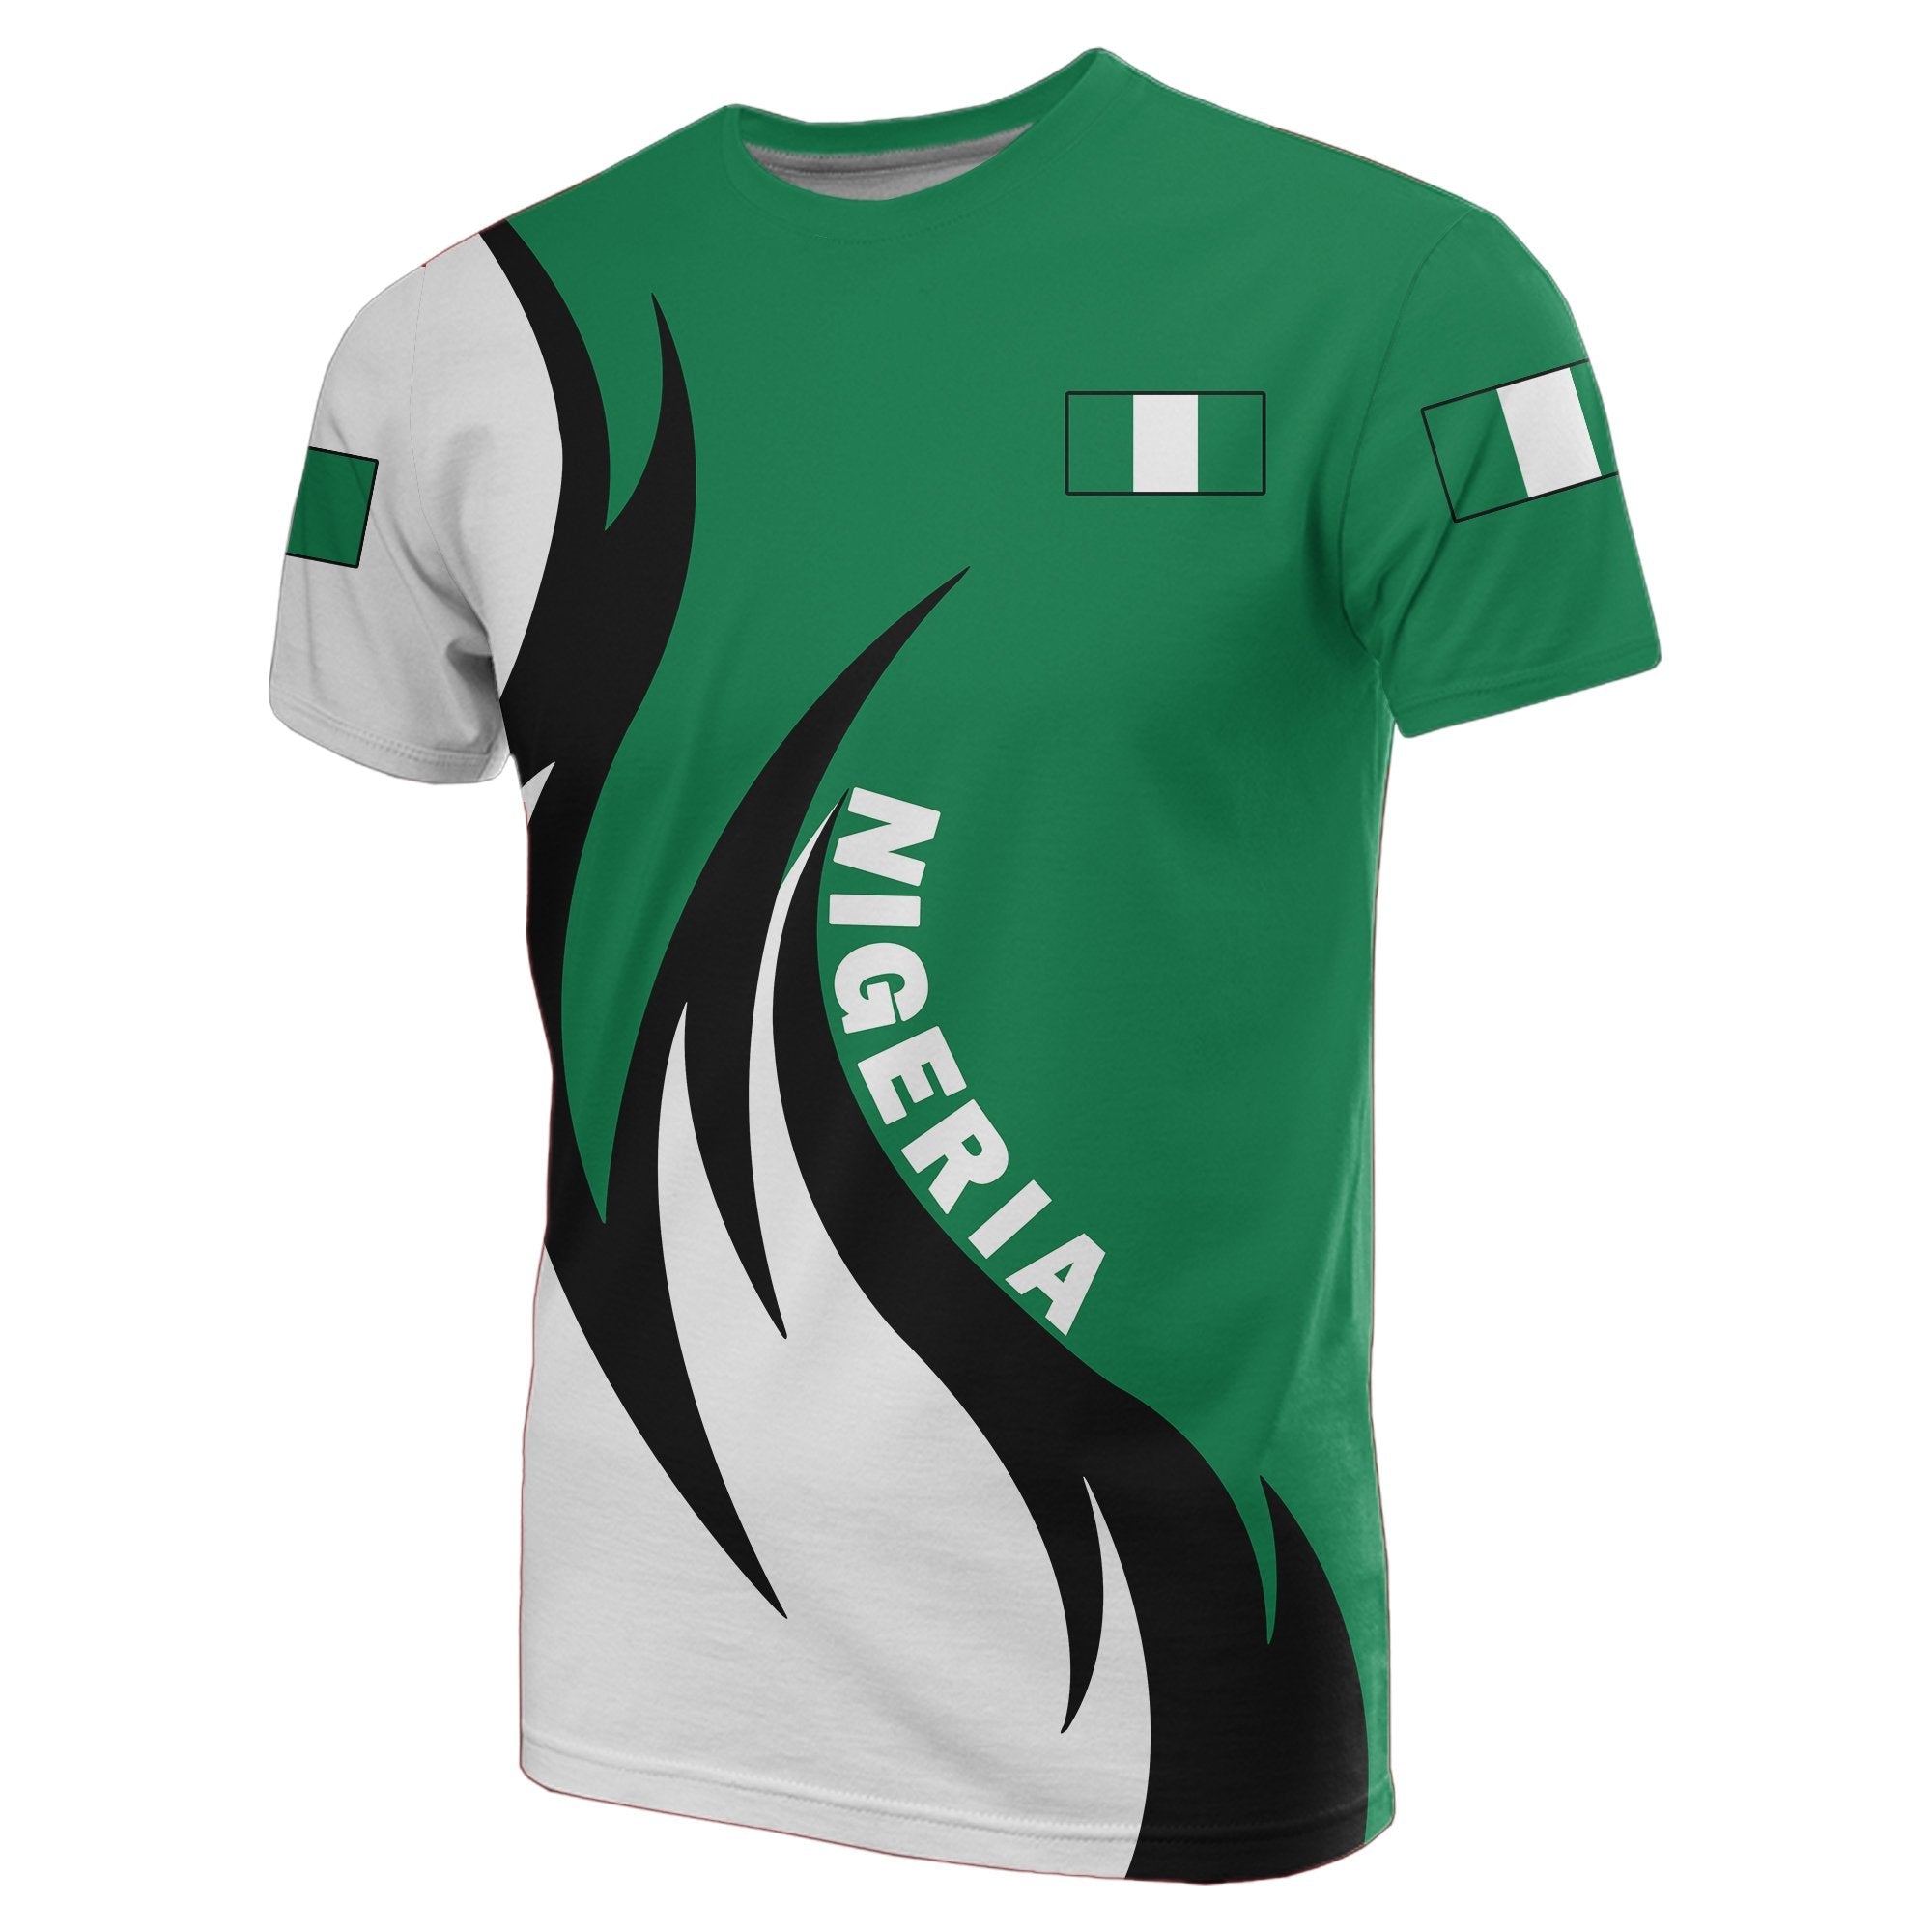 wonder-print-shop-t-shirt-nigeria-tee-coat-of-arms-fire-style